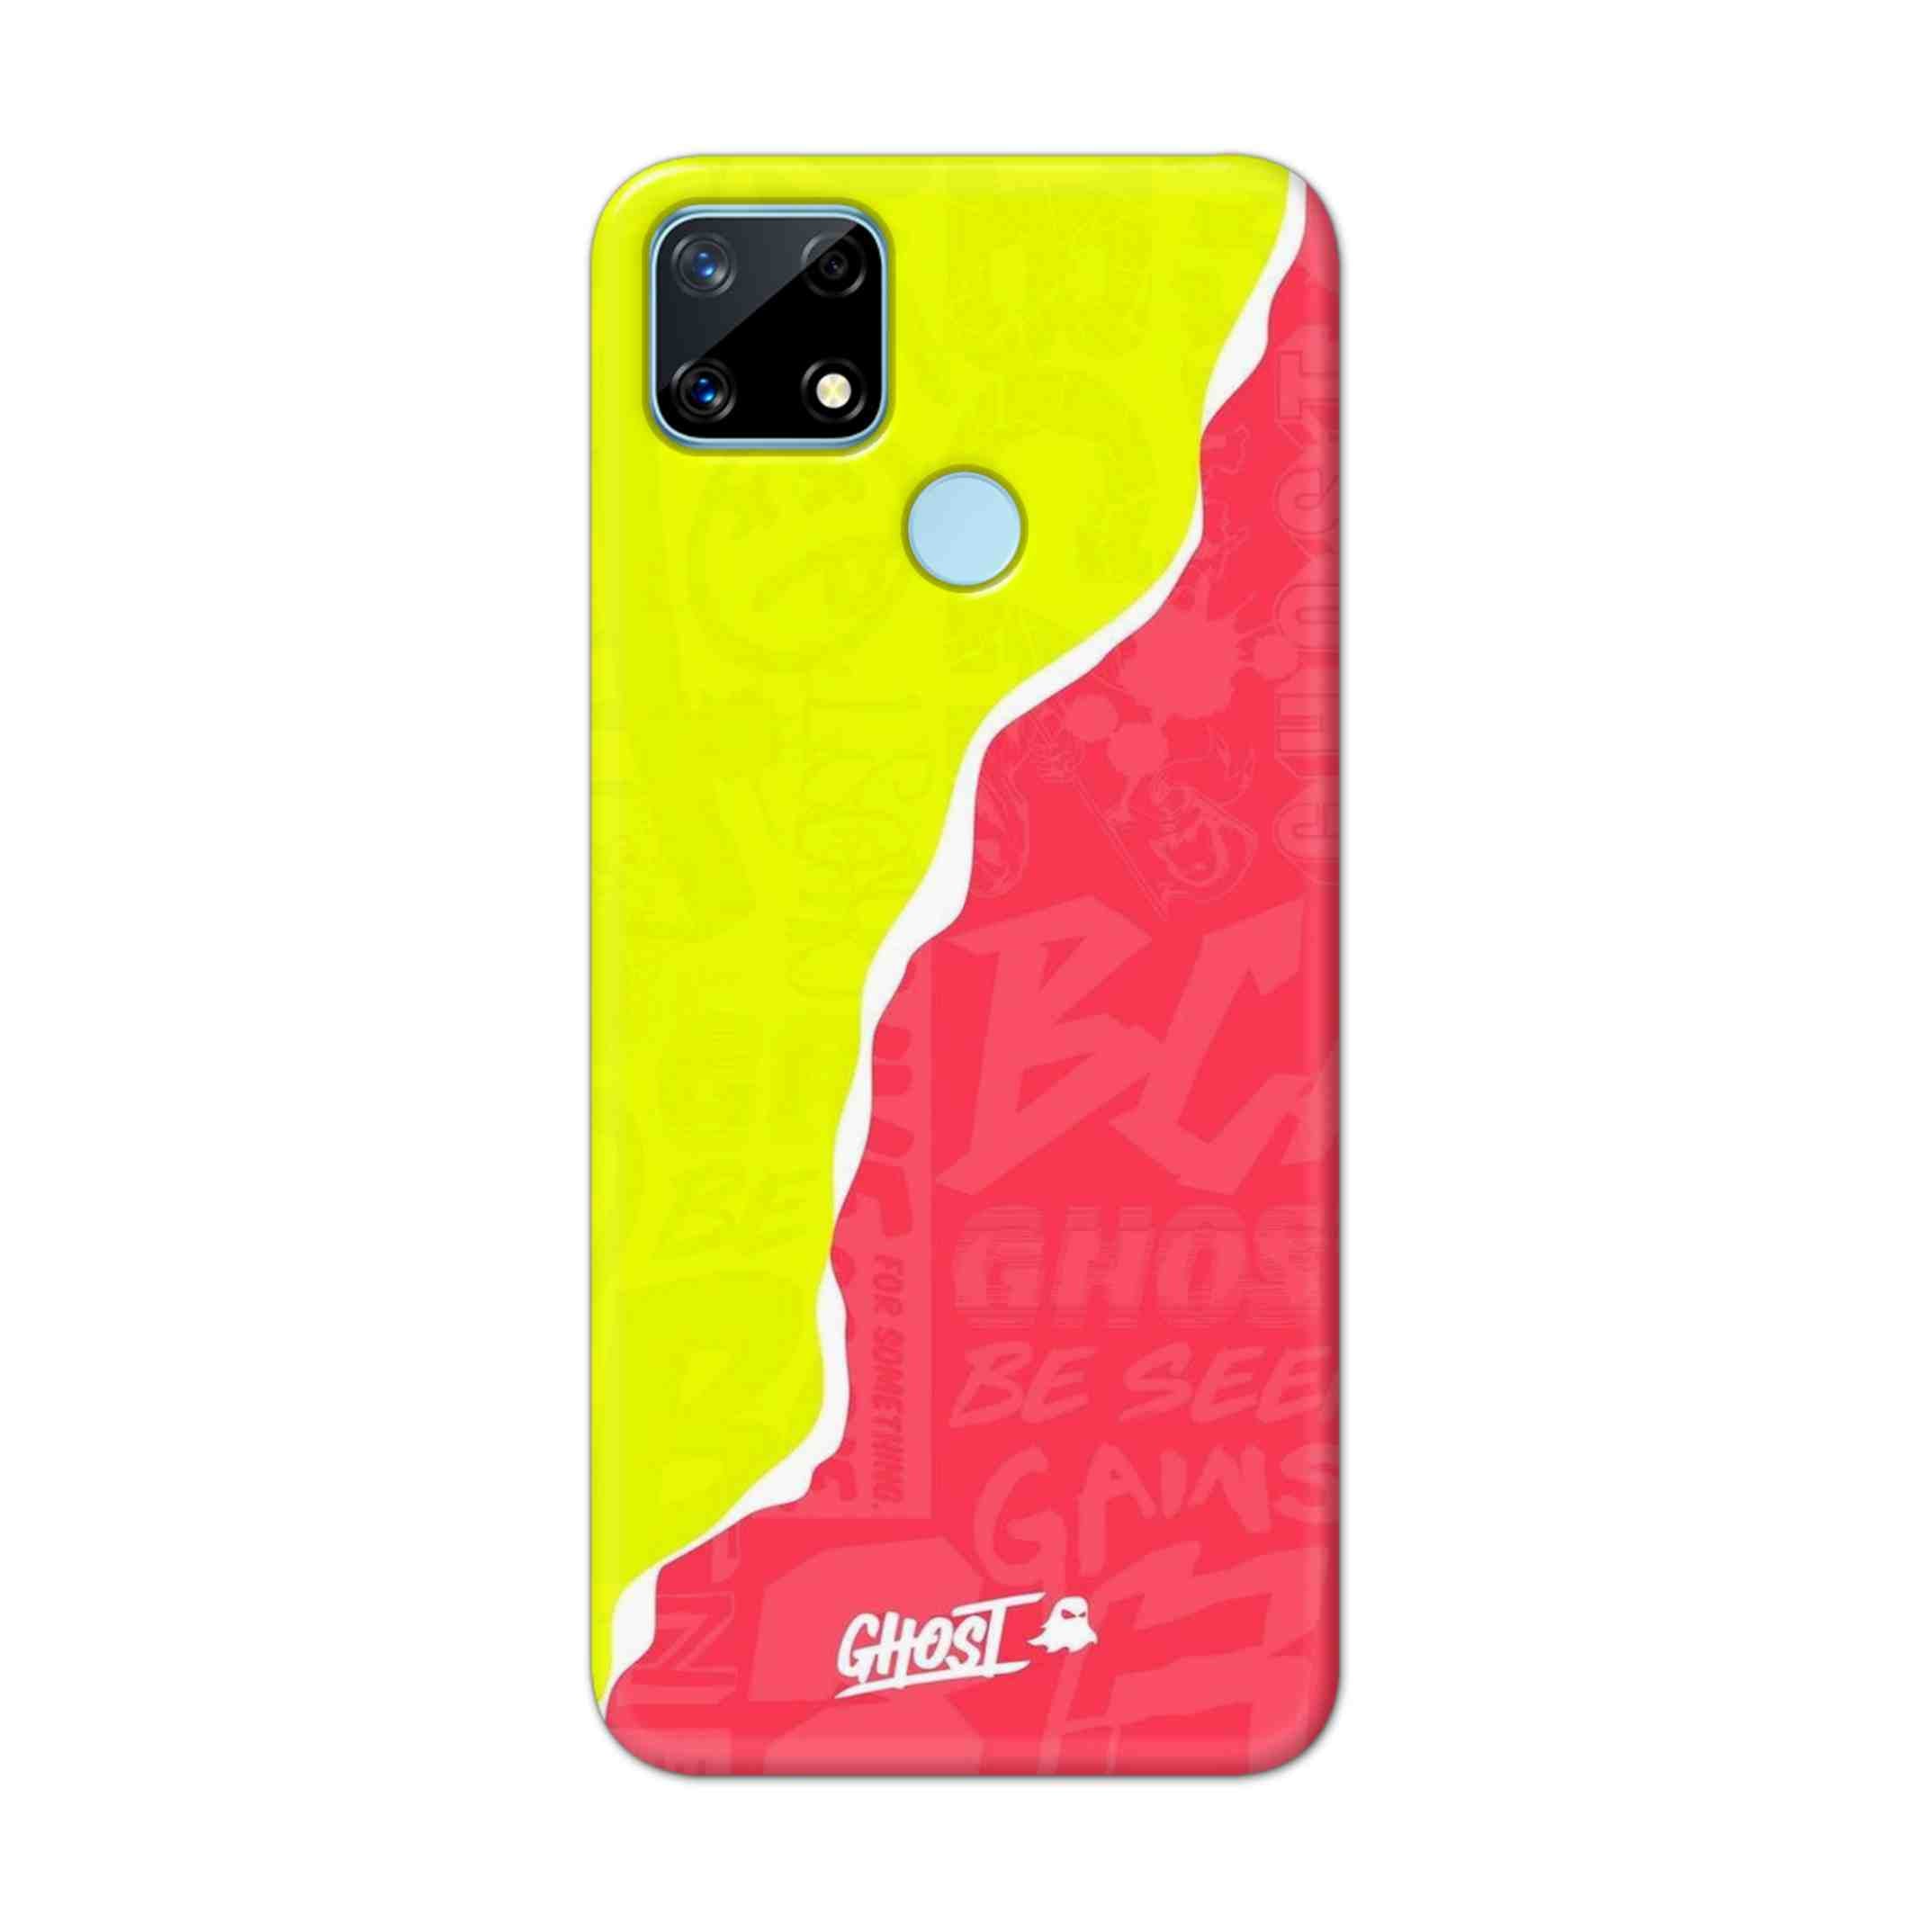 Buy Ghost Hard Back Mobile Phone Case Cover For Realme Narzo 20 Online